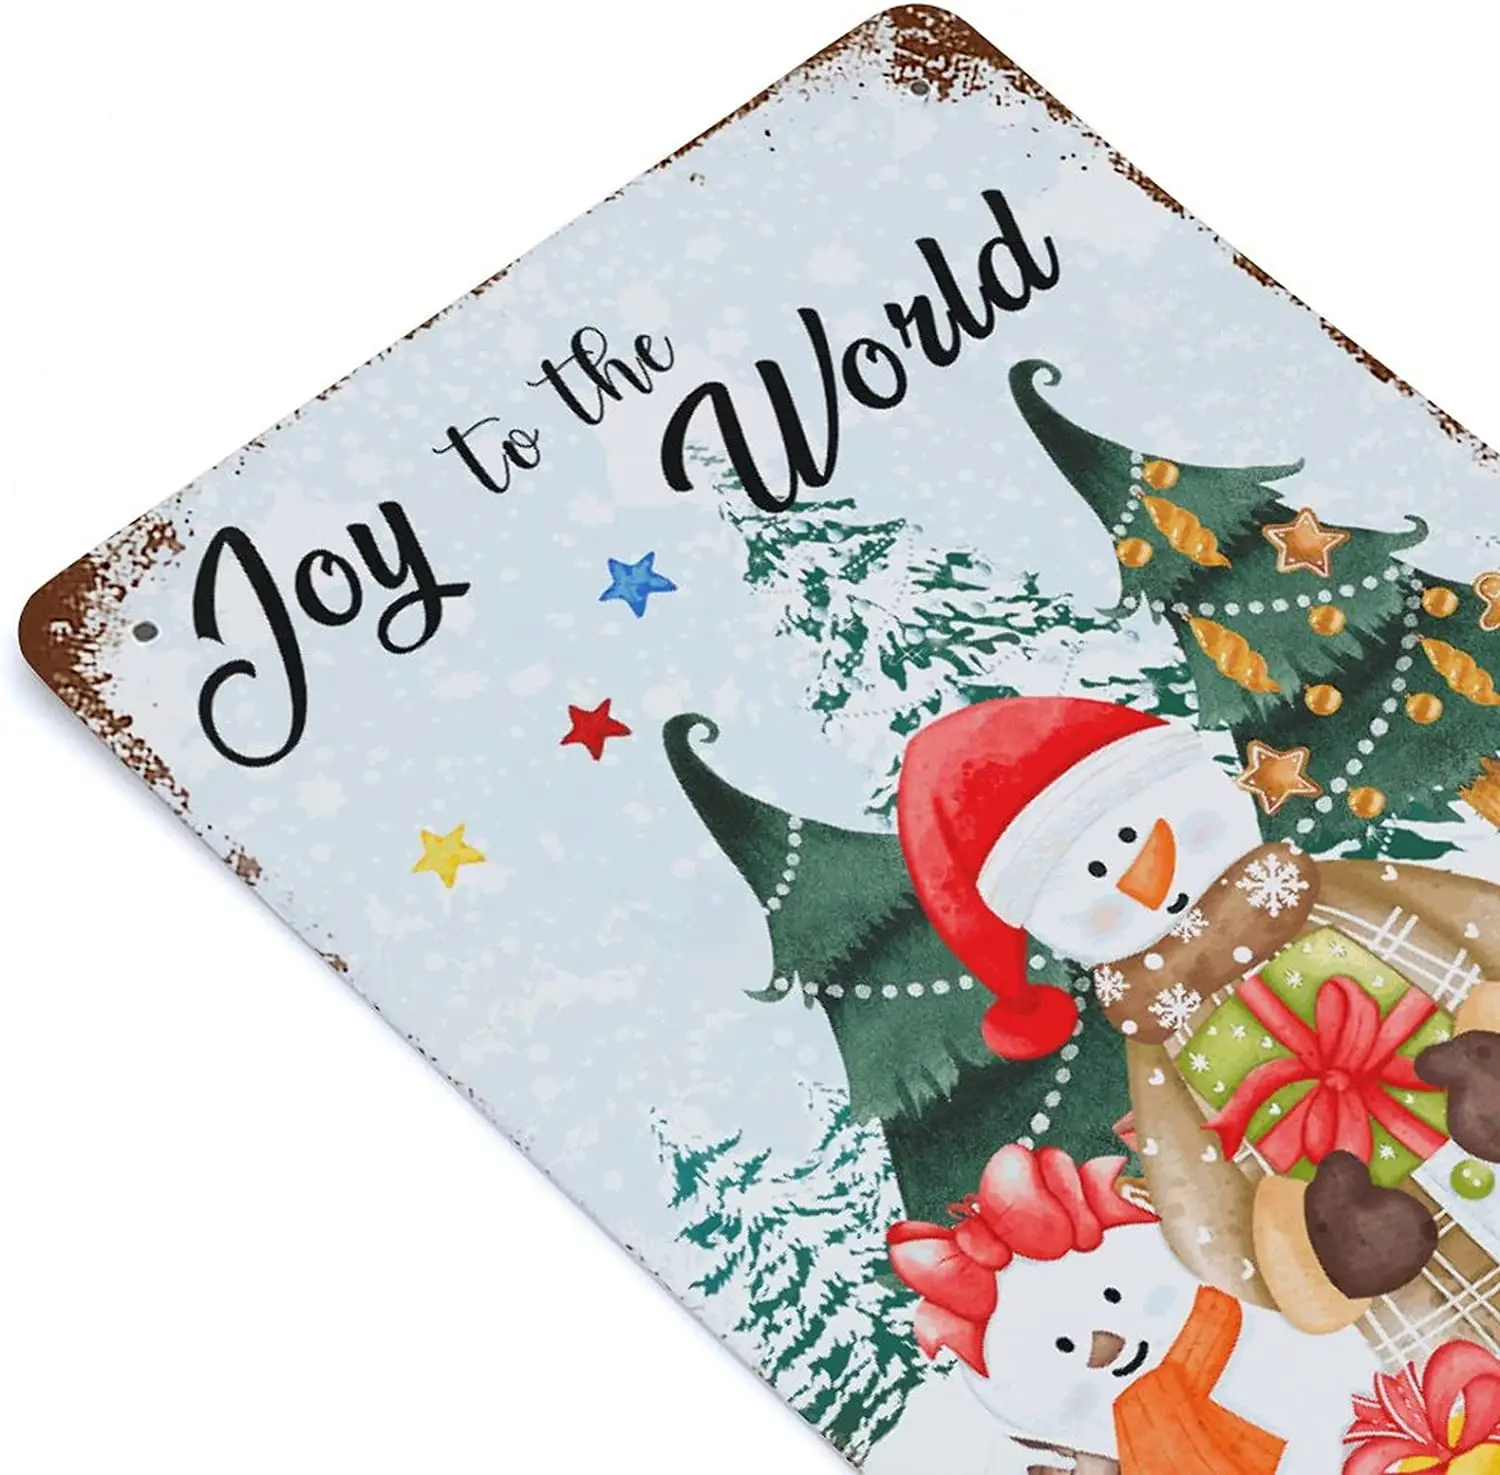 Retro Metal Tin Sign 8x12 Inch Christmas Snowman And Gnome Joy to The World Metal Sign for Christmas Tin Sign Funny images - 6